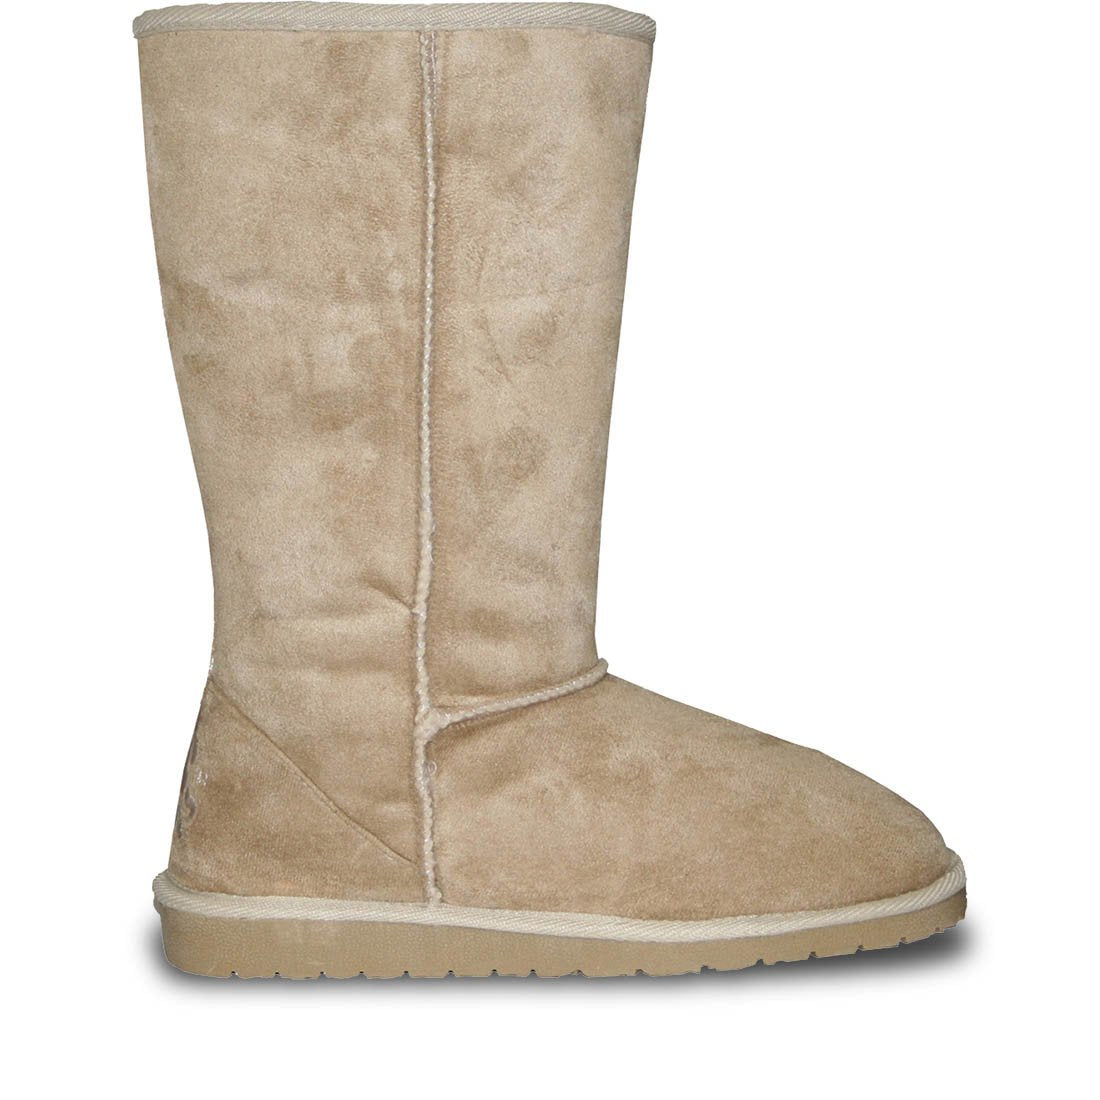 Image of Women's 13-inch Microfiber Boots